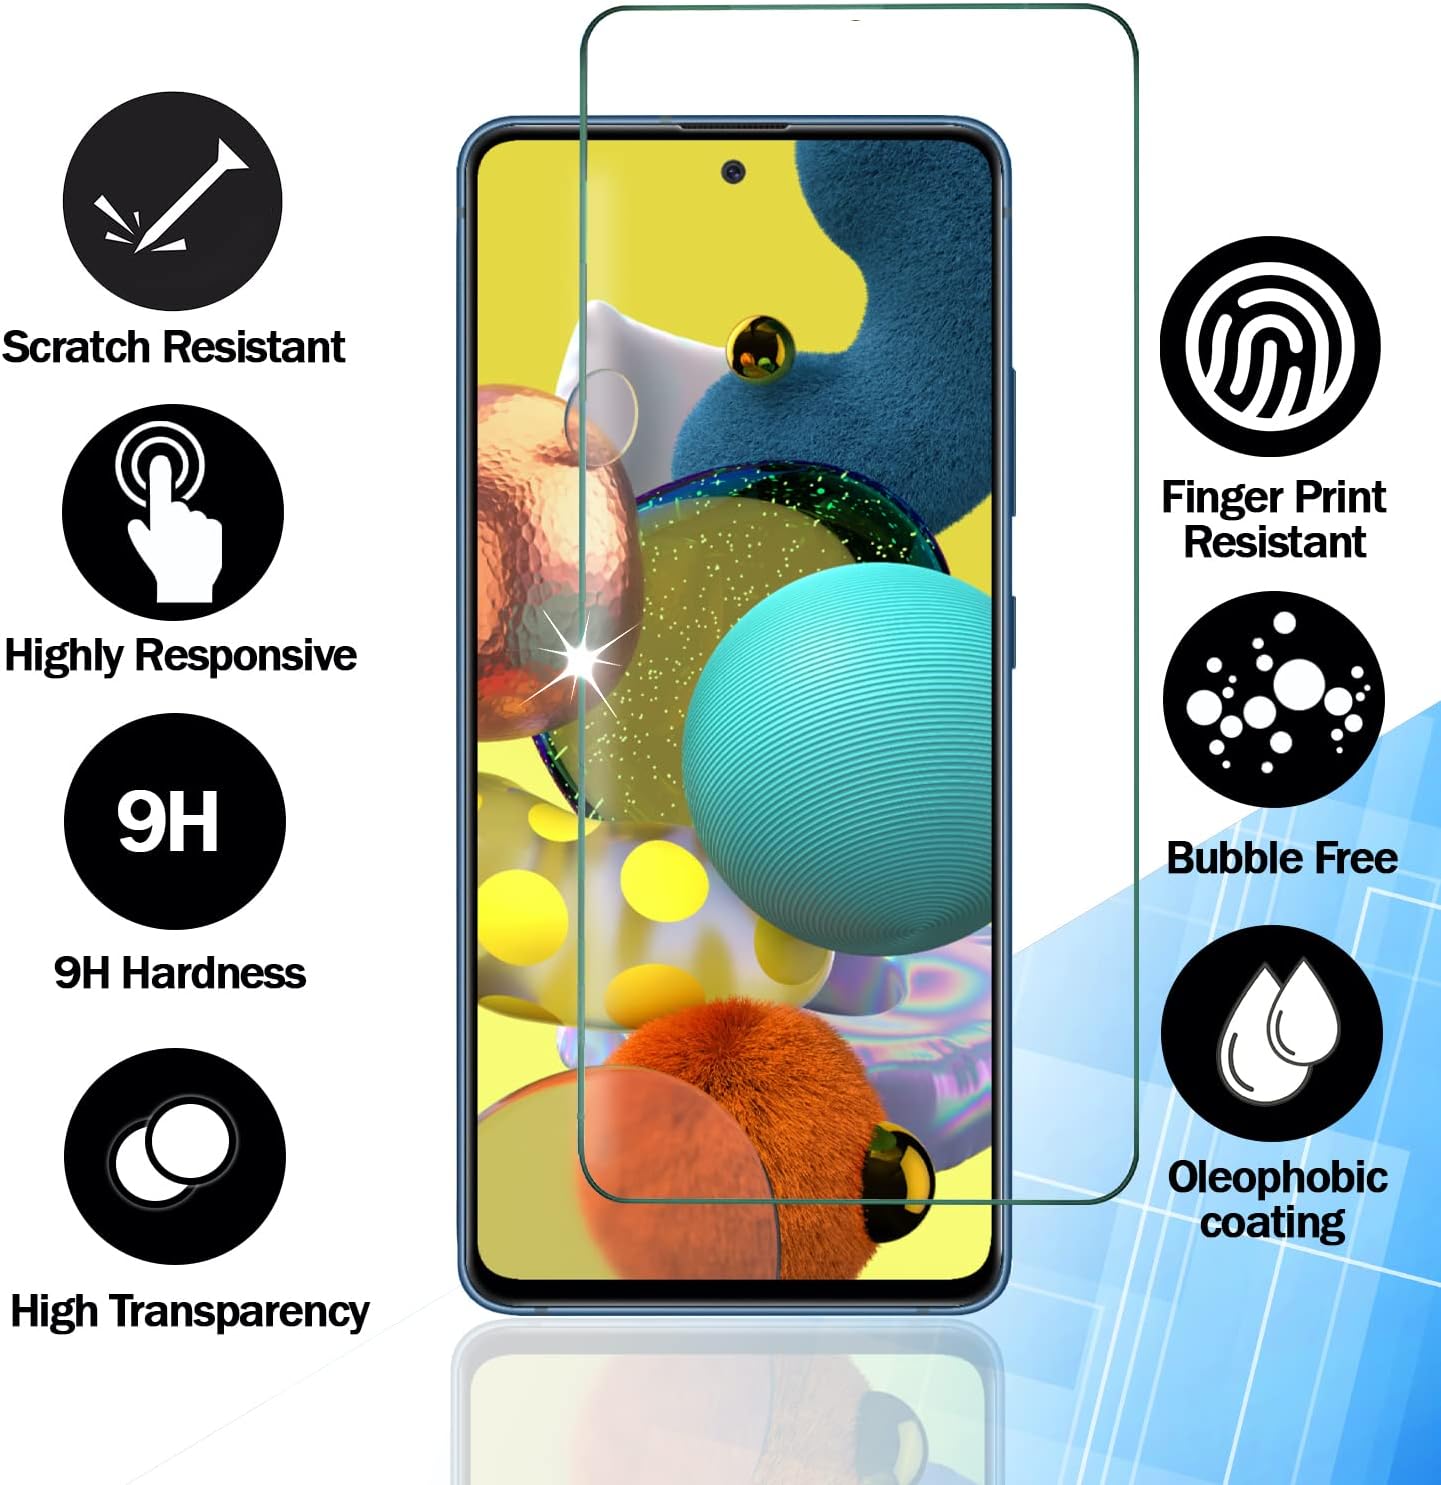 Redmi🔥Save 49% 📱Invisible Artifact Screen Protector -Dust Free Without Bubbles